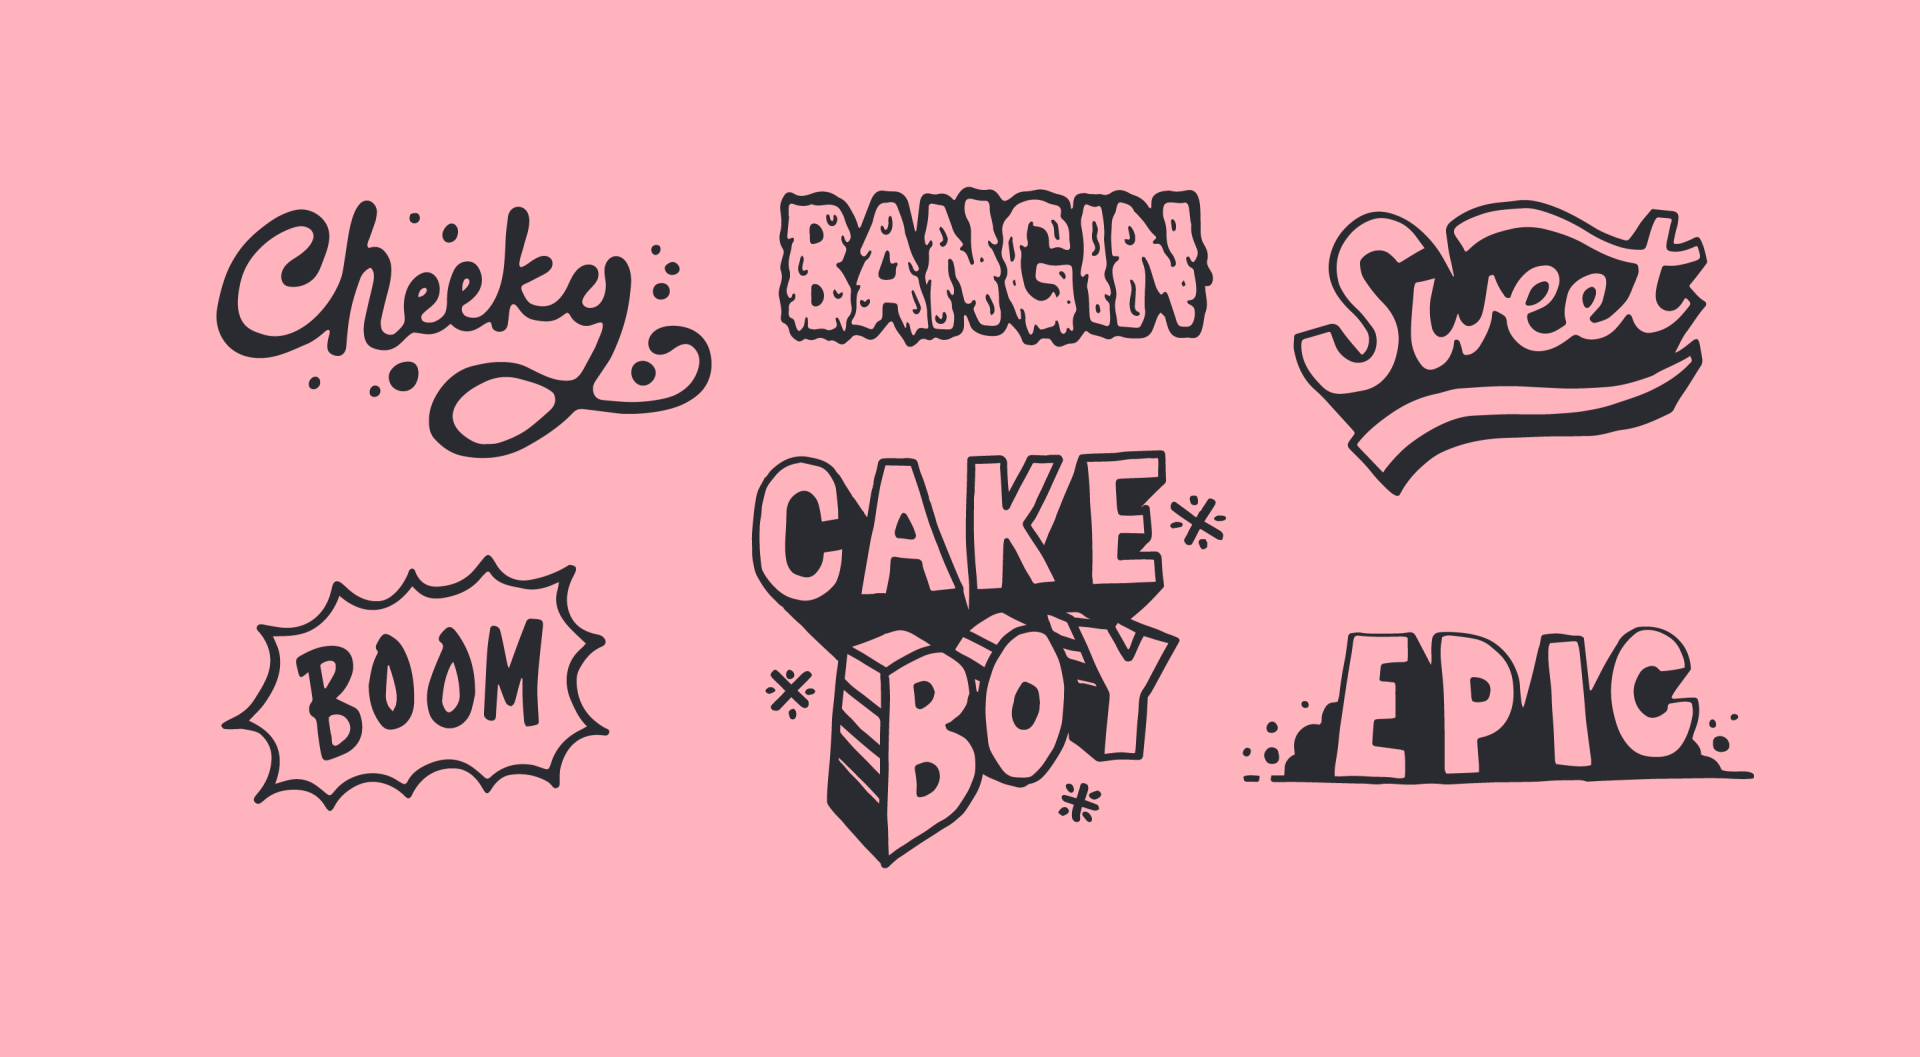 Selection of hand-drawn typography in various styles on a pink background.